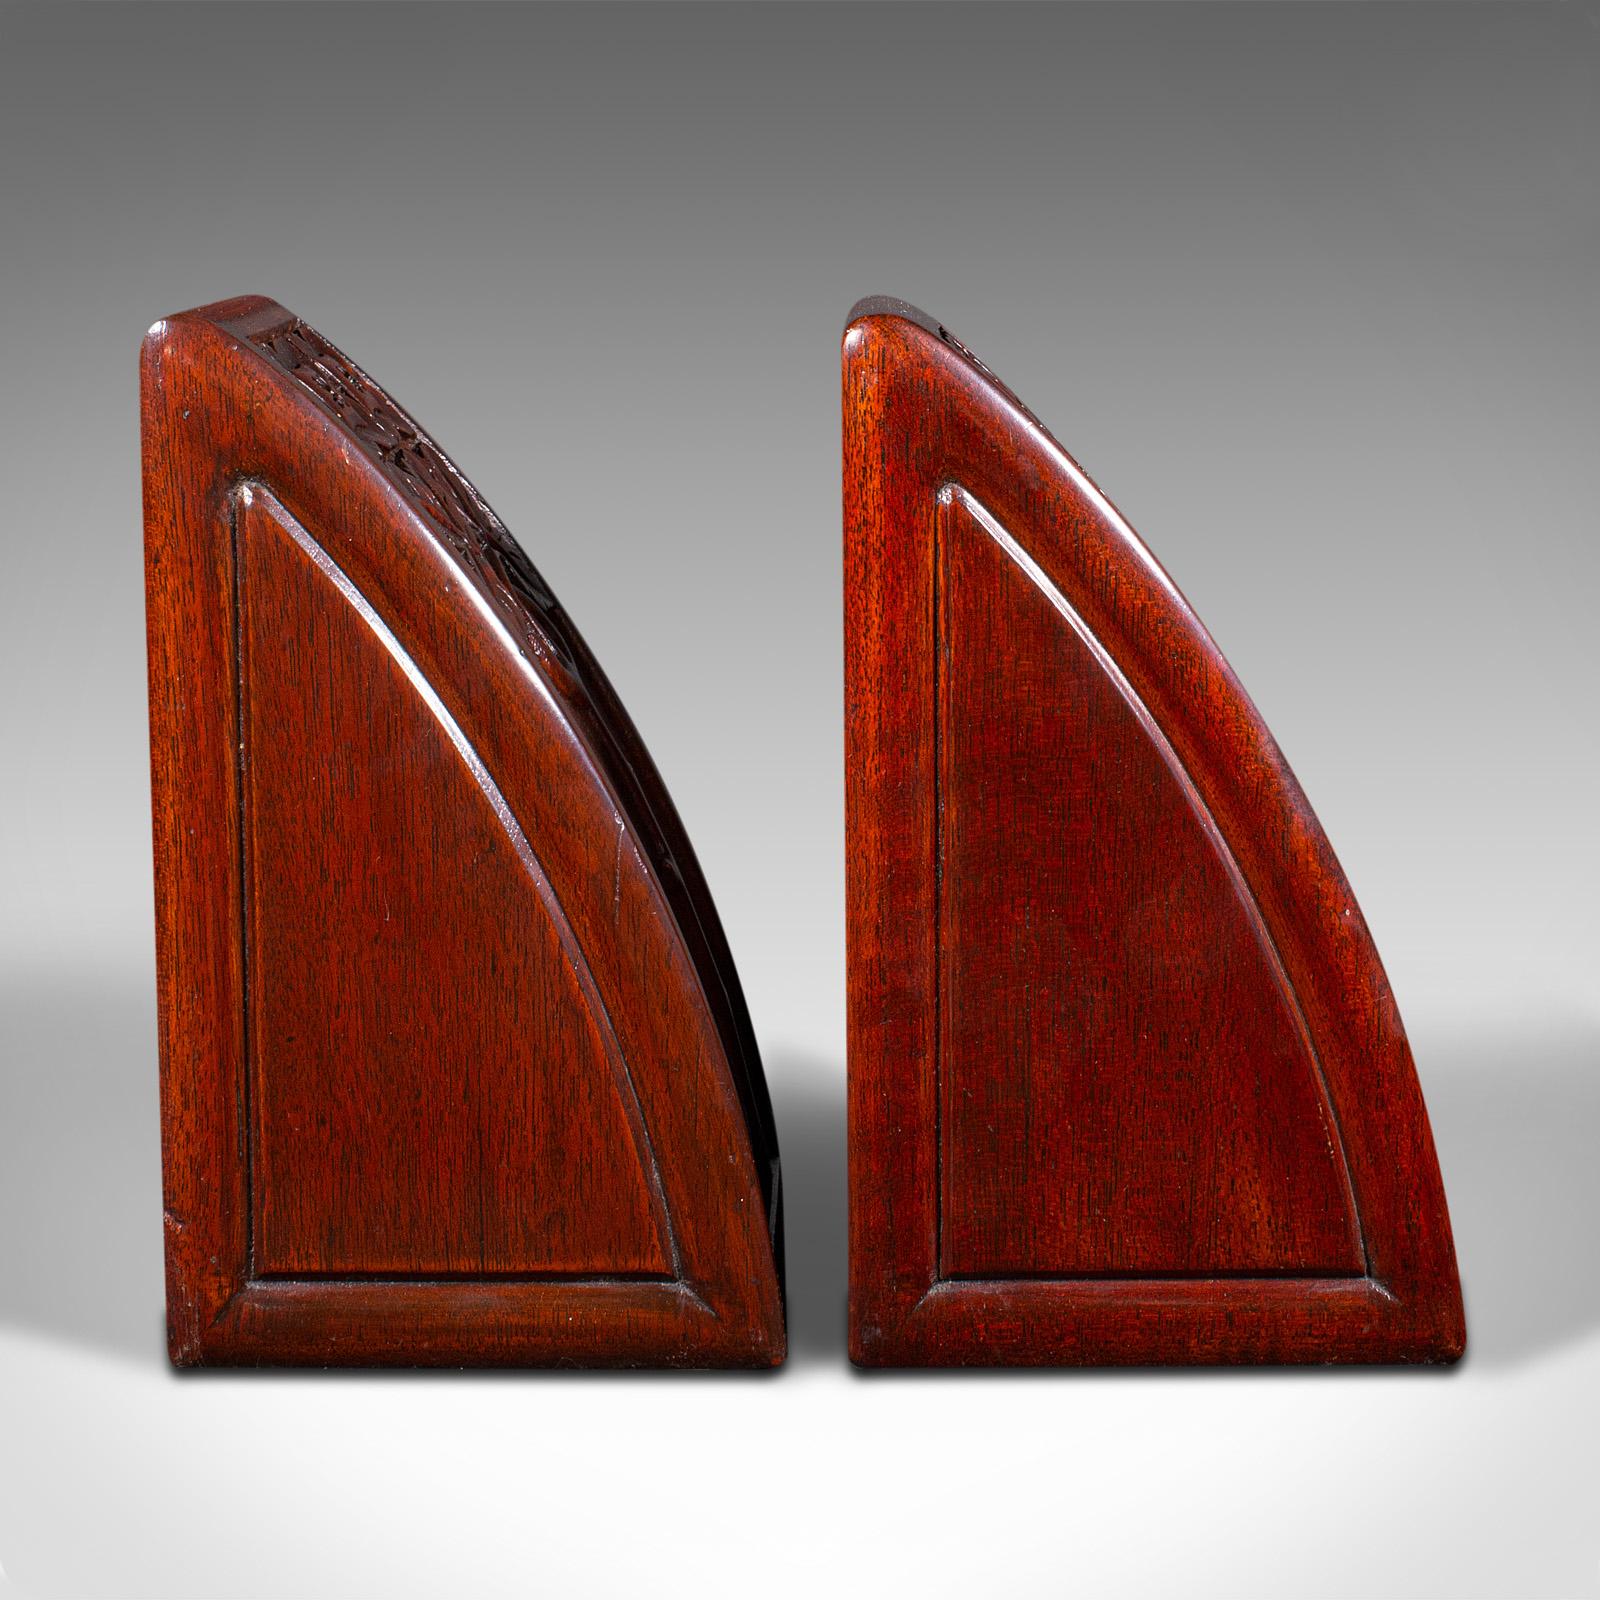 Pair Of Antique Weighted Bookends, English, Book Rest, Art Nouveau, Edwardian In Good Condition For Sale In Hele, Devon, GB